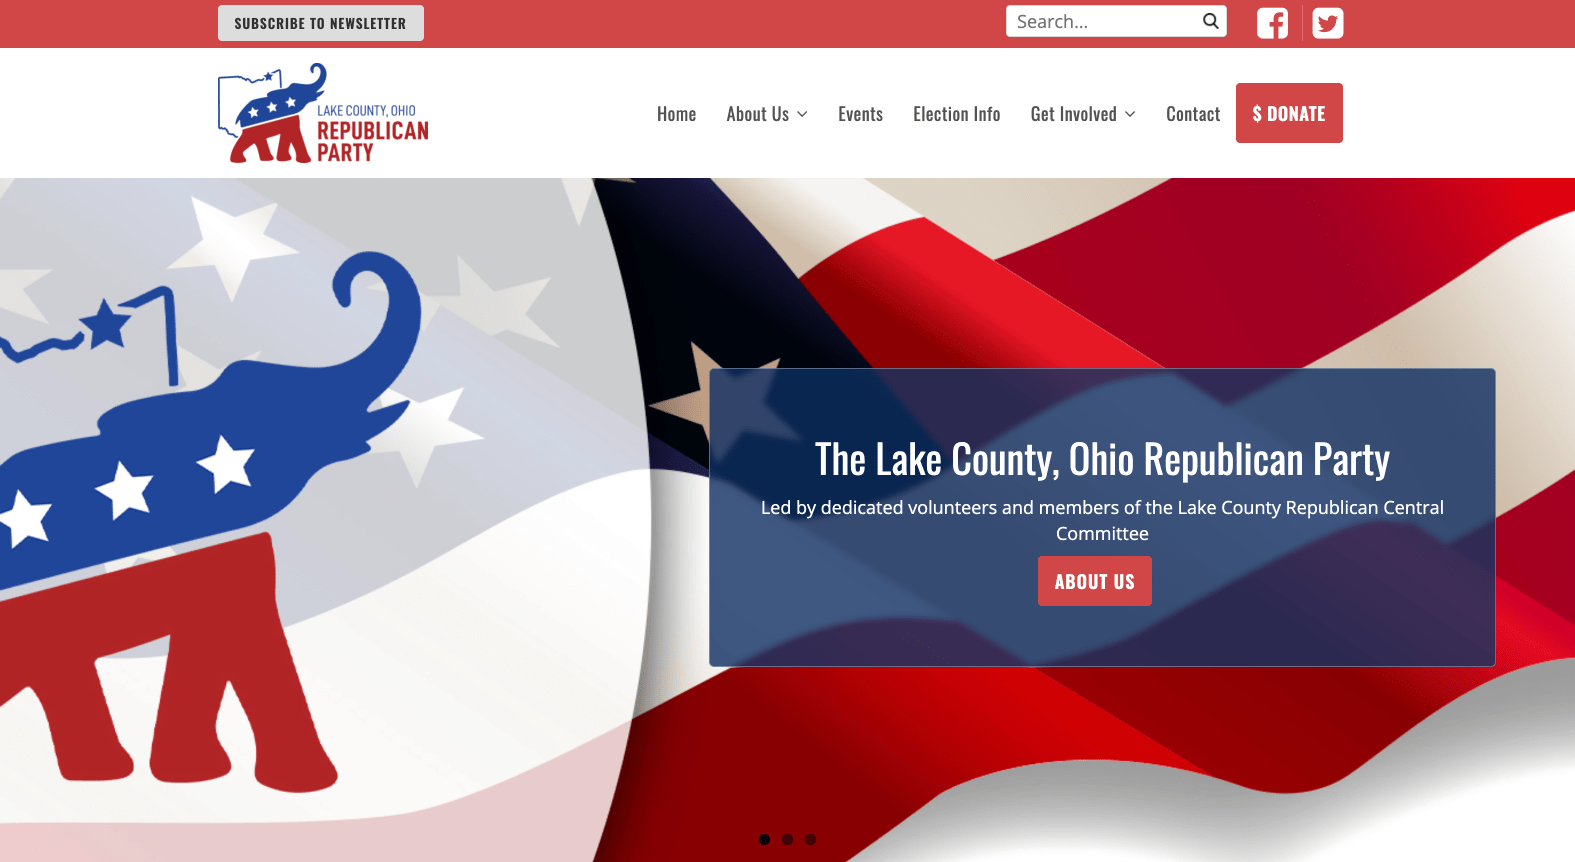 The Lake County, Ohio Republican Party